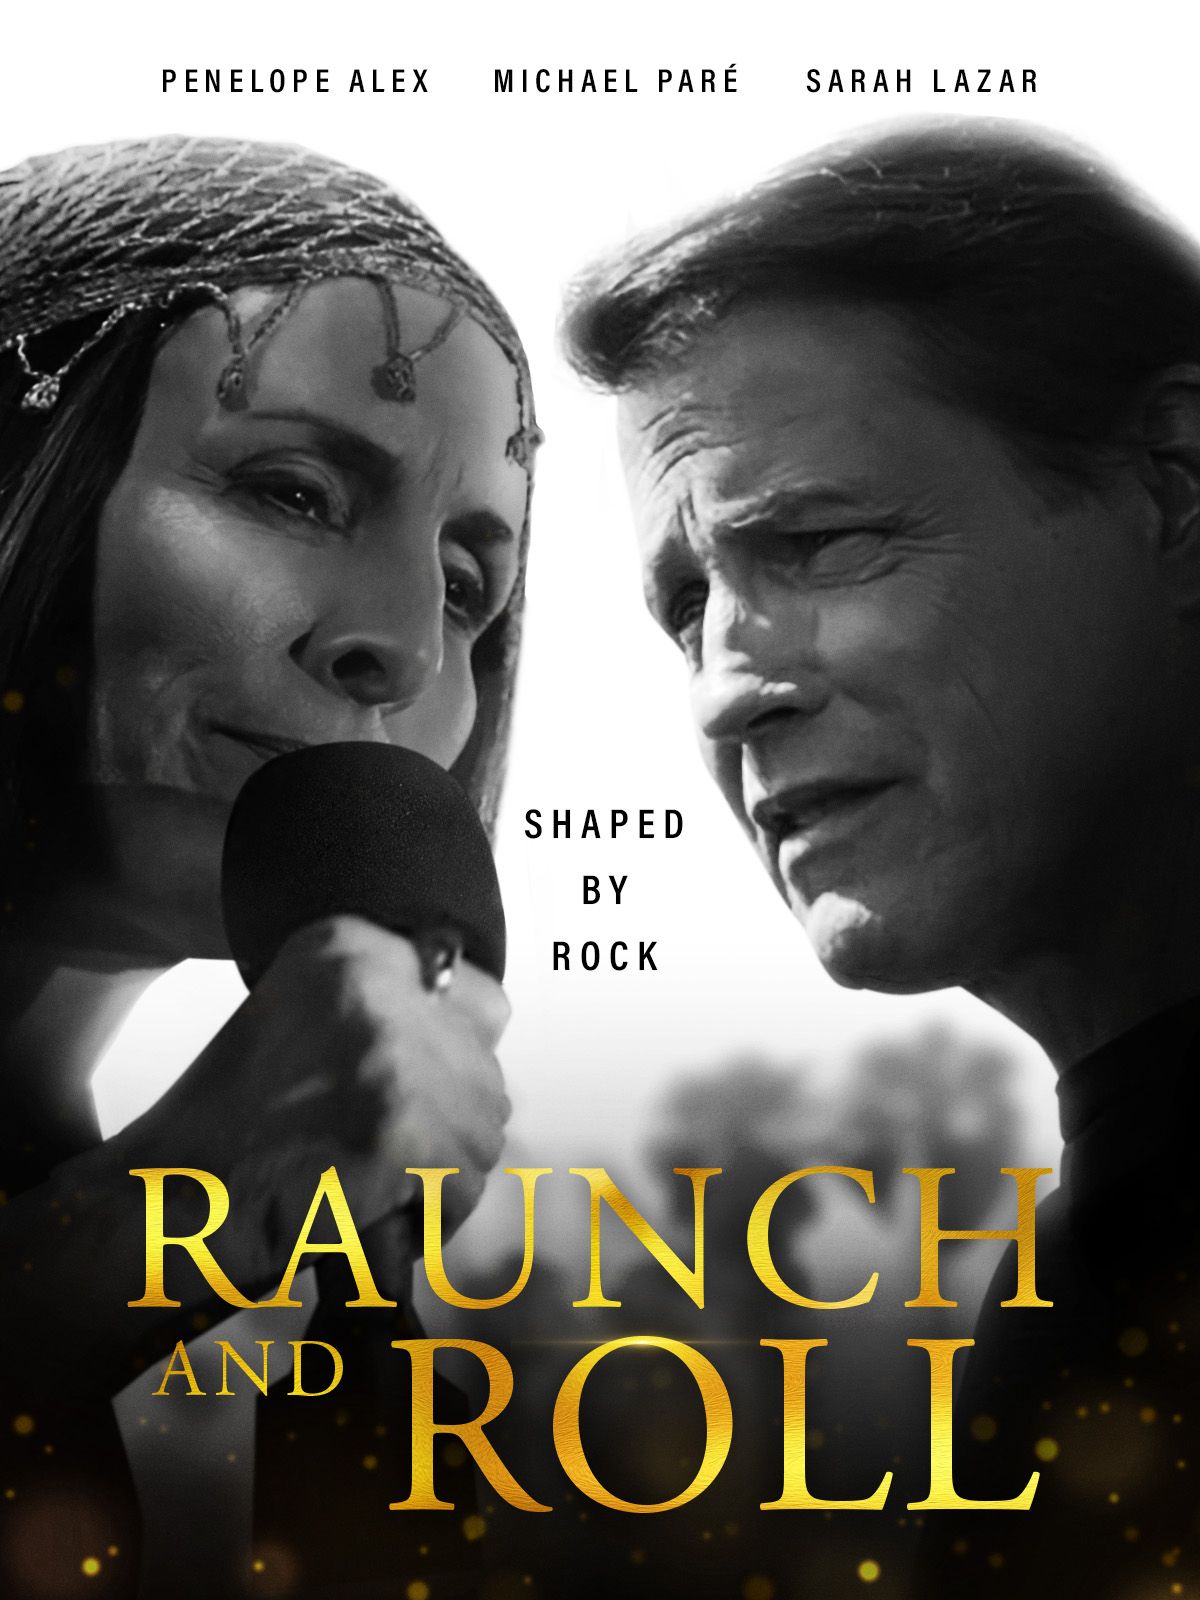 Keyart for the movie Raunch and Roll